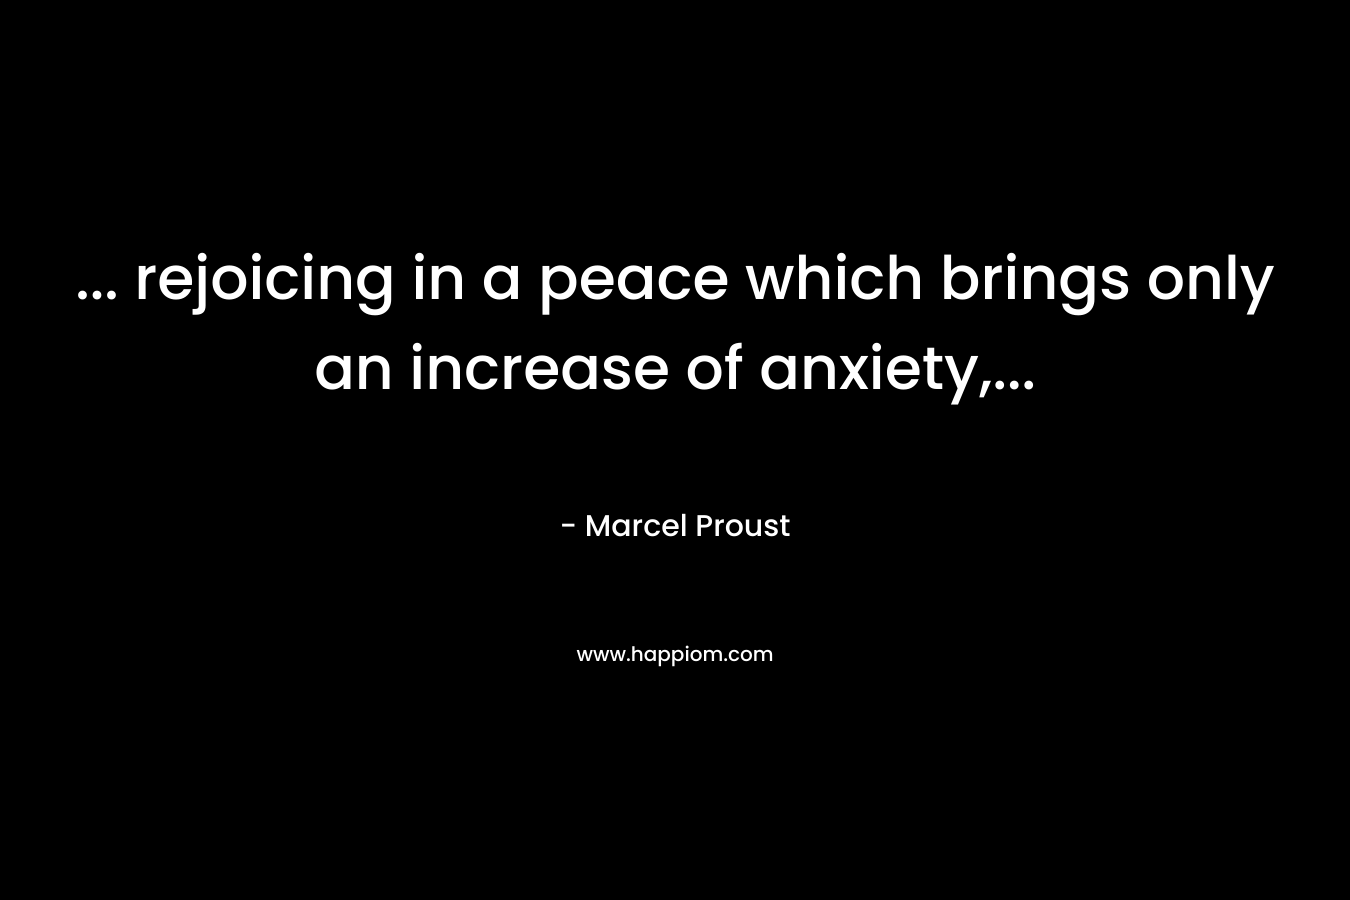 ... rejoicing in a peace which brings only an increase of anxiety,...